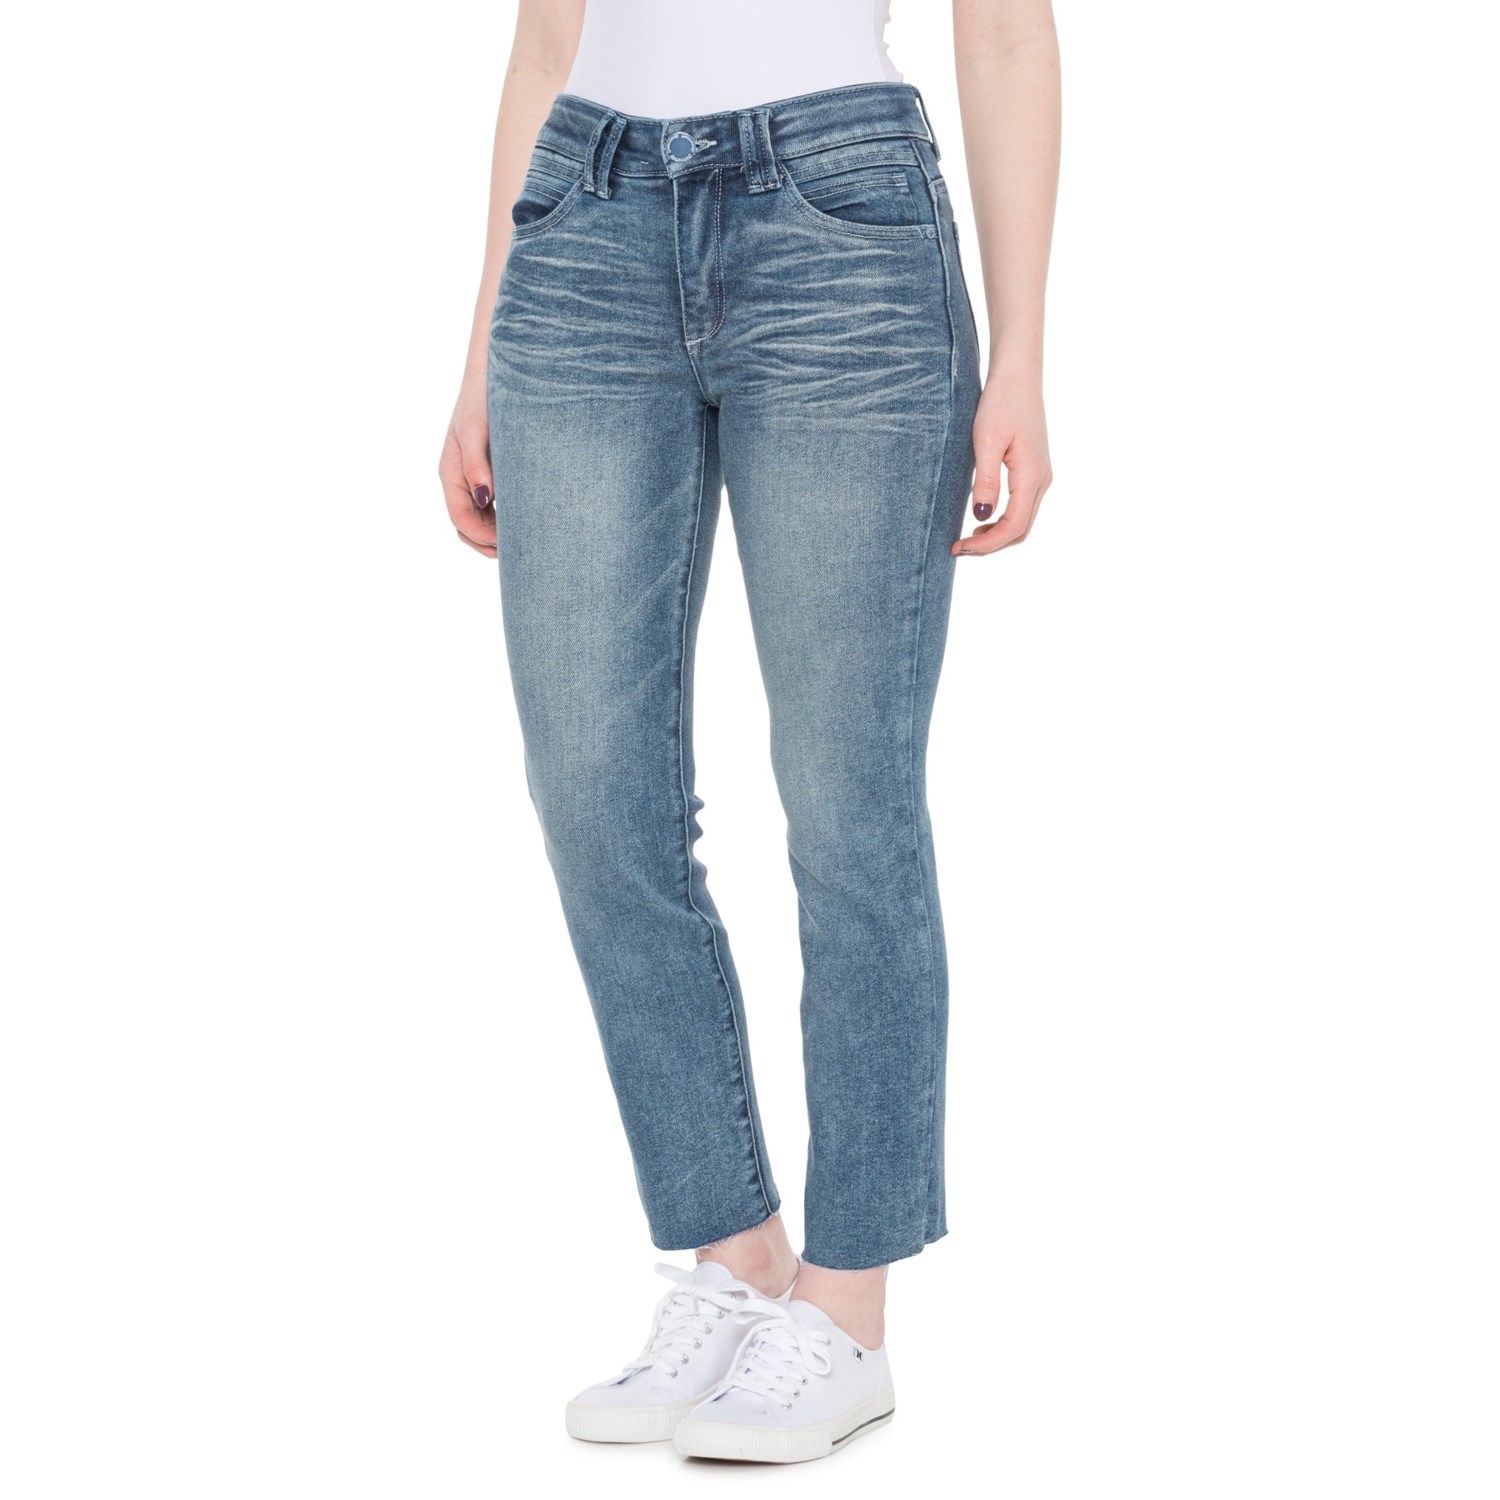 Democracy AbTechnology Vintage Skinny Jeans - High Rise